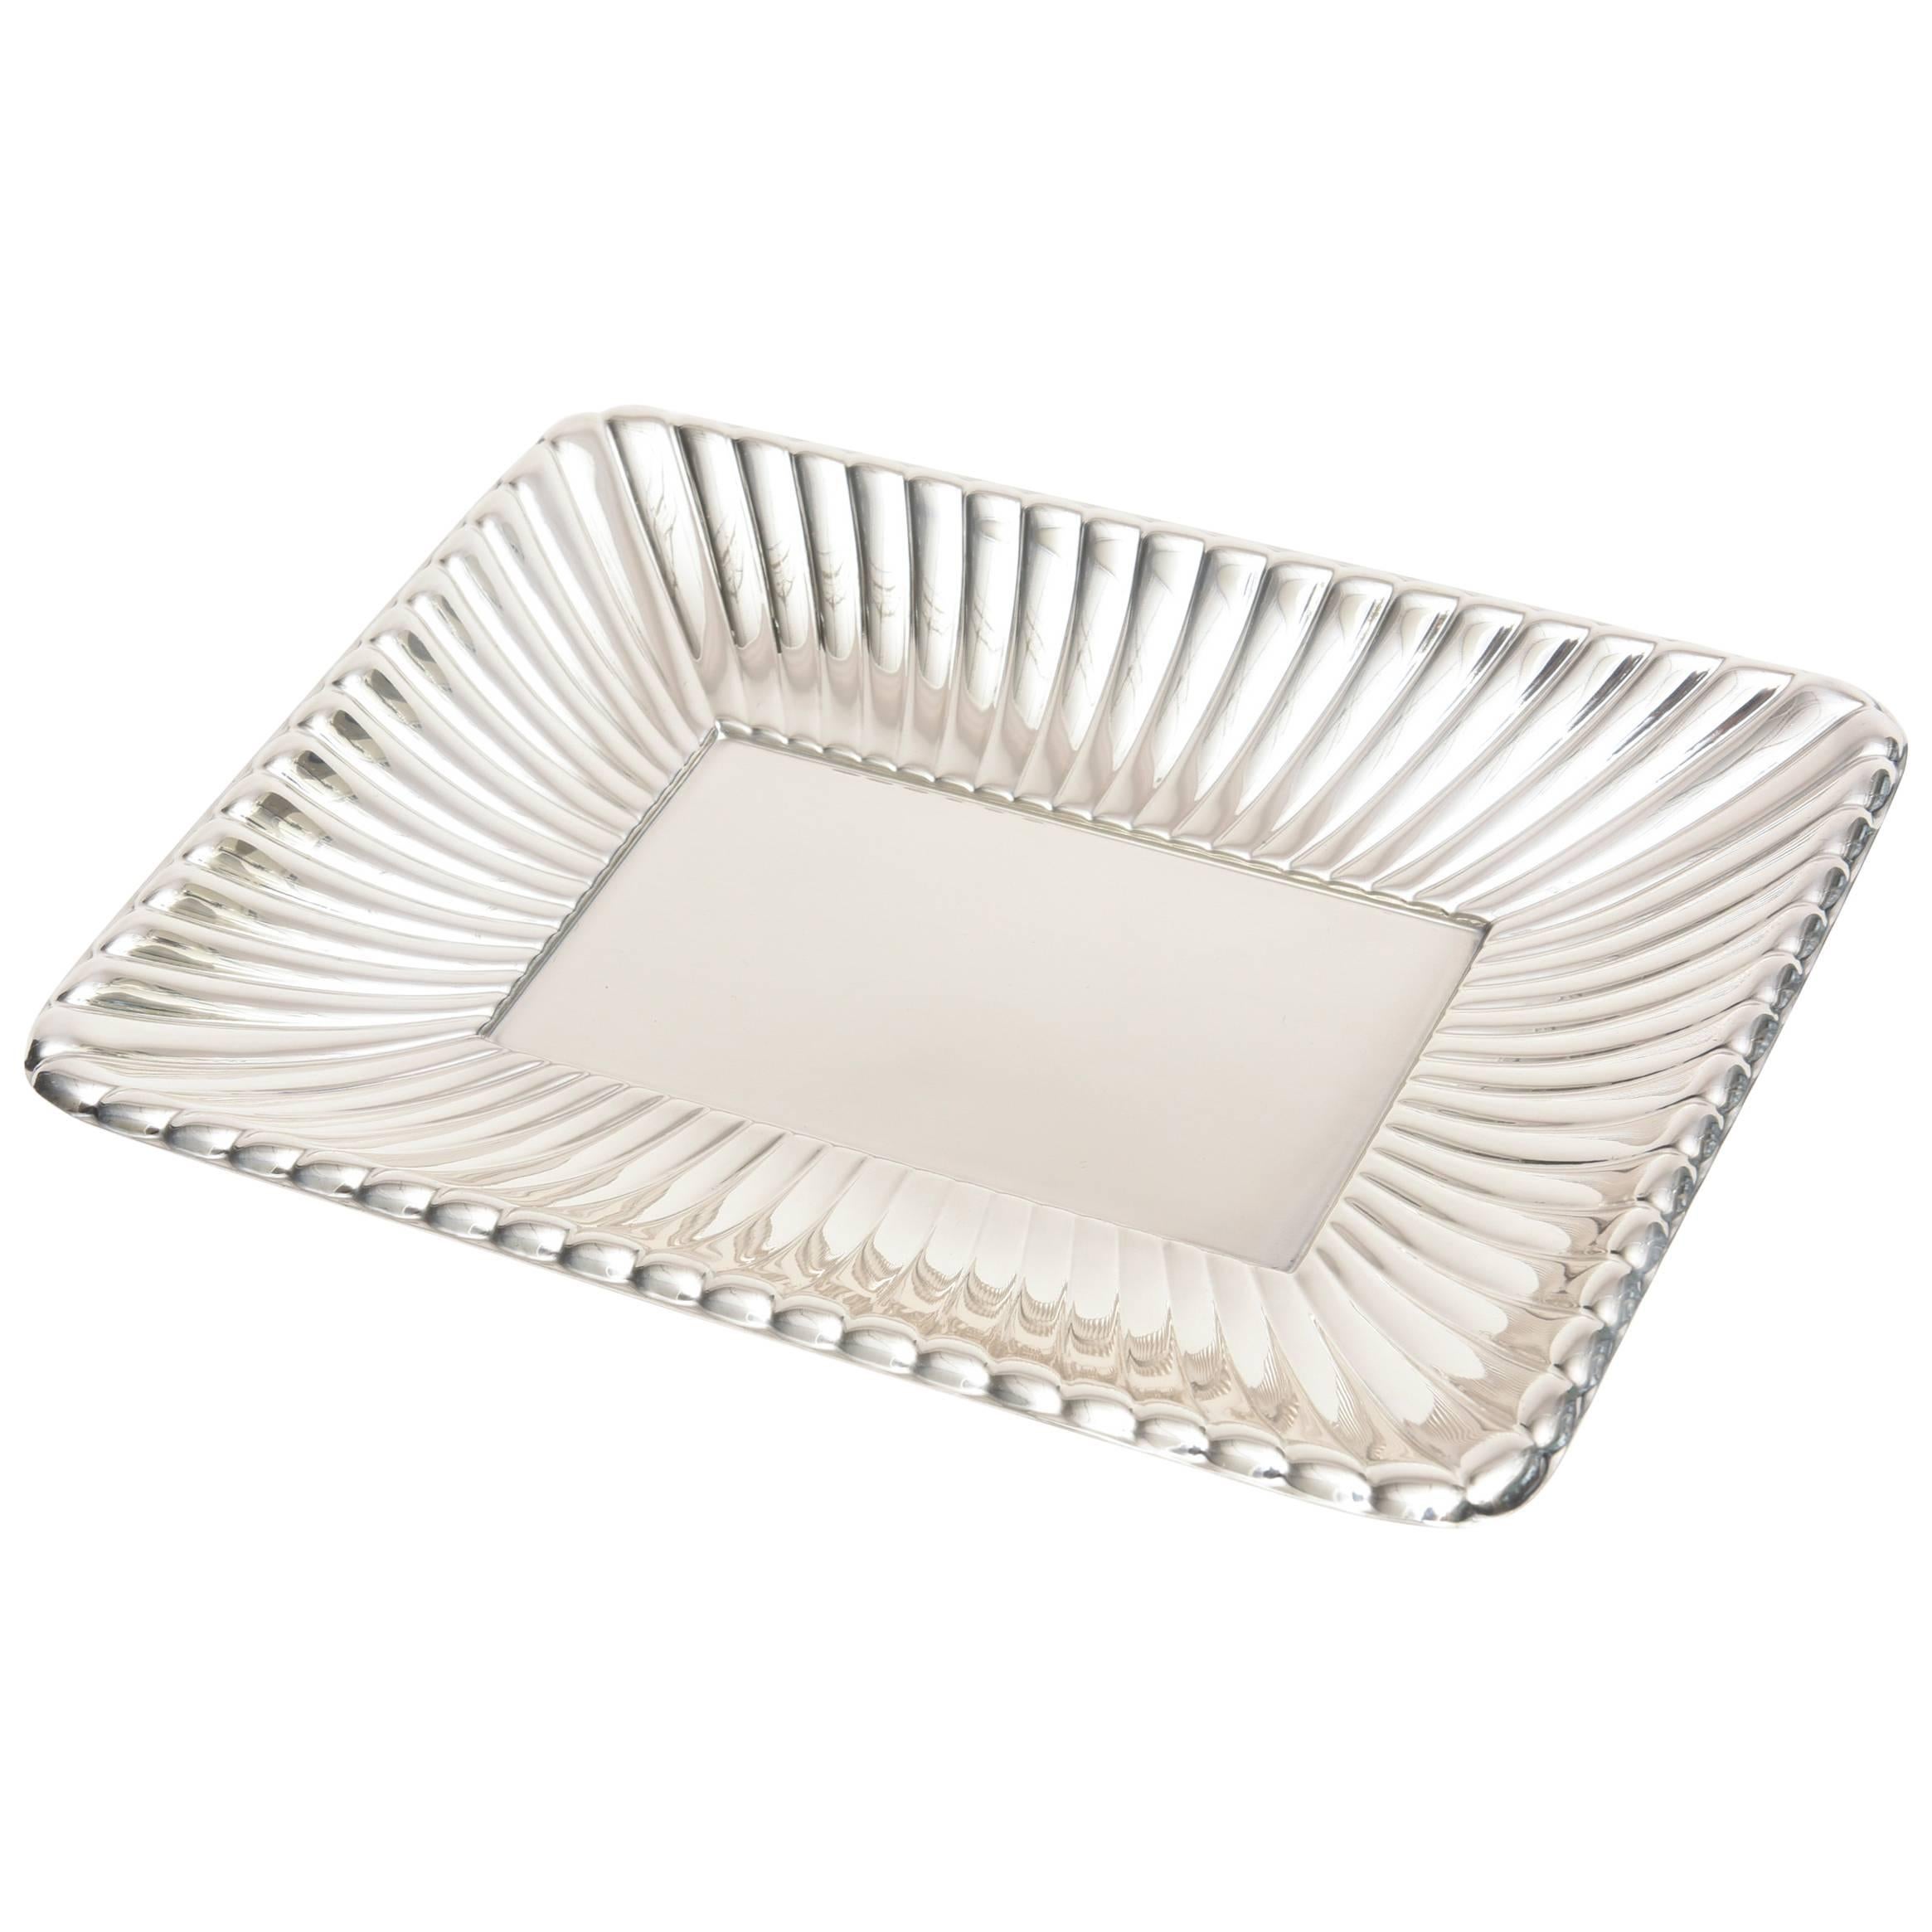  Reed and Barton Sterling Silver Ribbed Serving Tray/ Dish